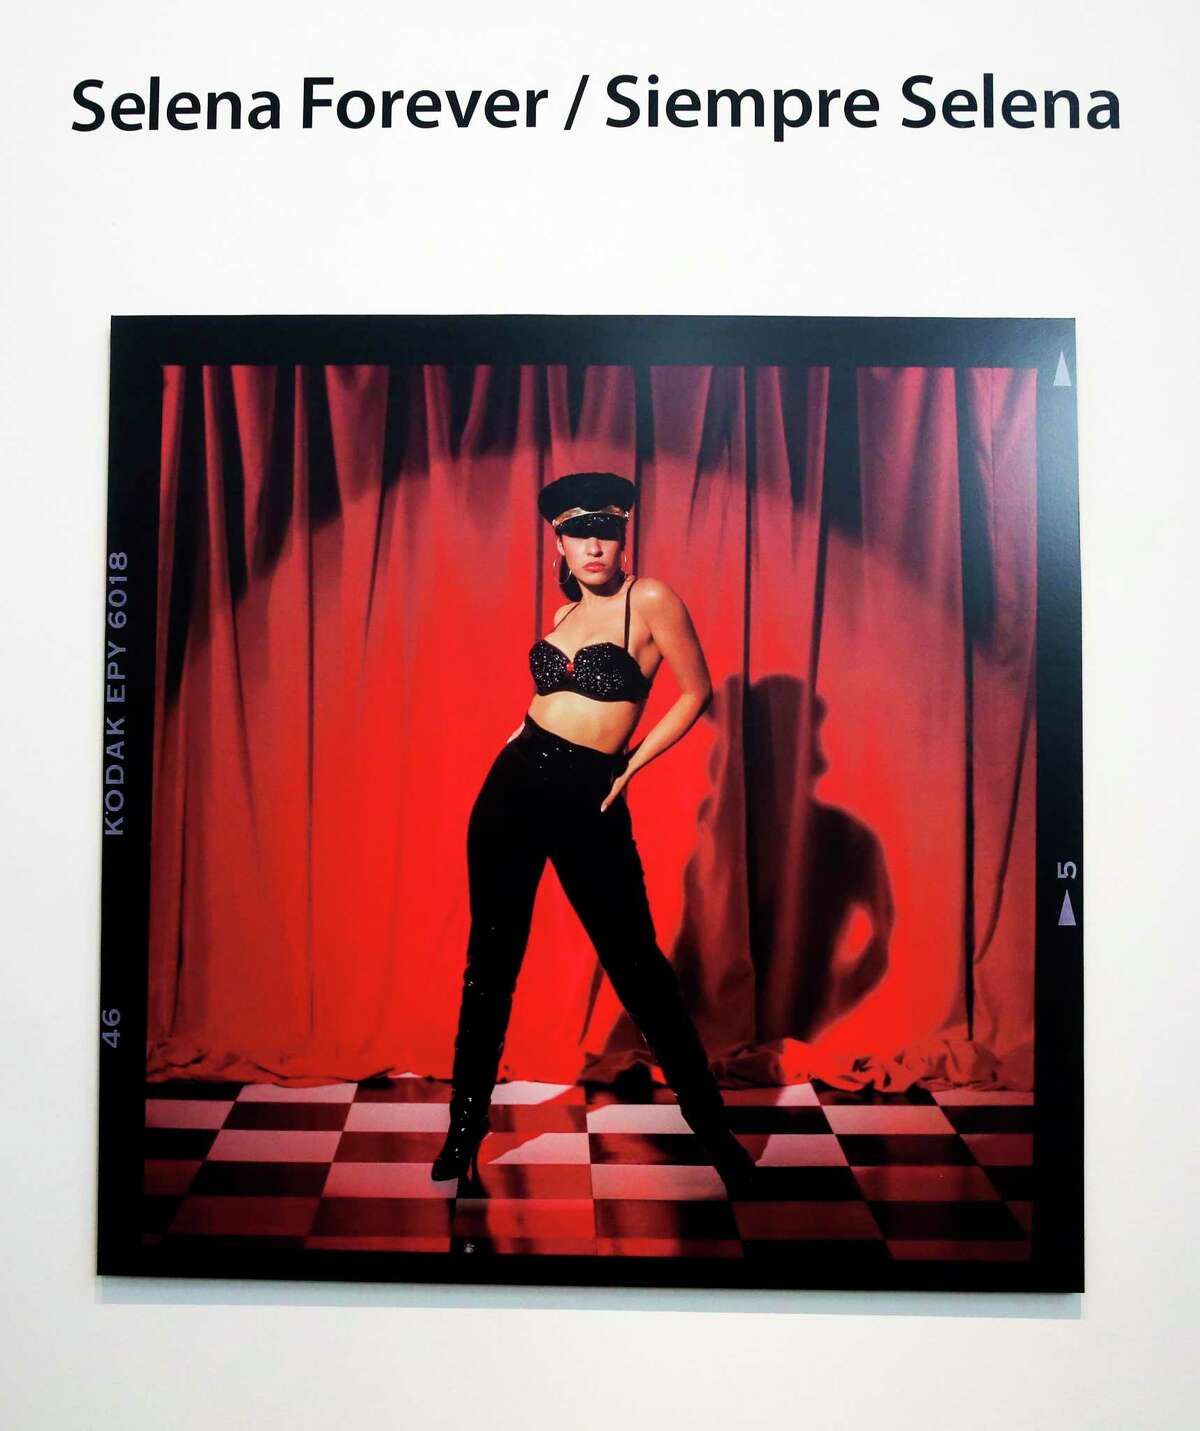 Selena posed in front of a red curtain for photographer John Dyer during one of two sessions he had with the Tejano icon. Images from those photo shootsmake up “Selena Forever/Siempre Selena,” an exhibit at the McNay Art Museum. The show includes a selfie spot with a red curtain where visitors can emulate Selena’s poses.